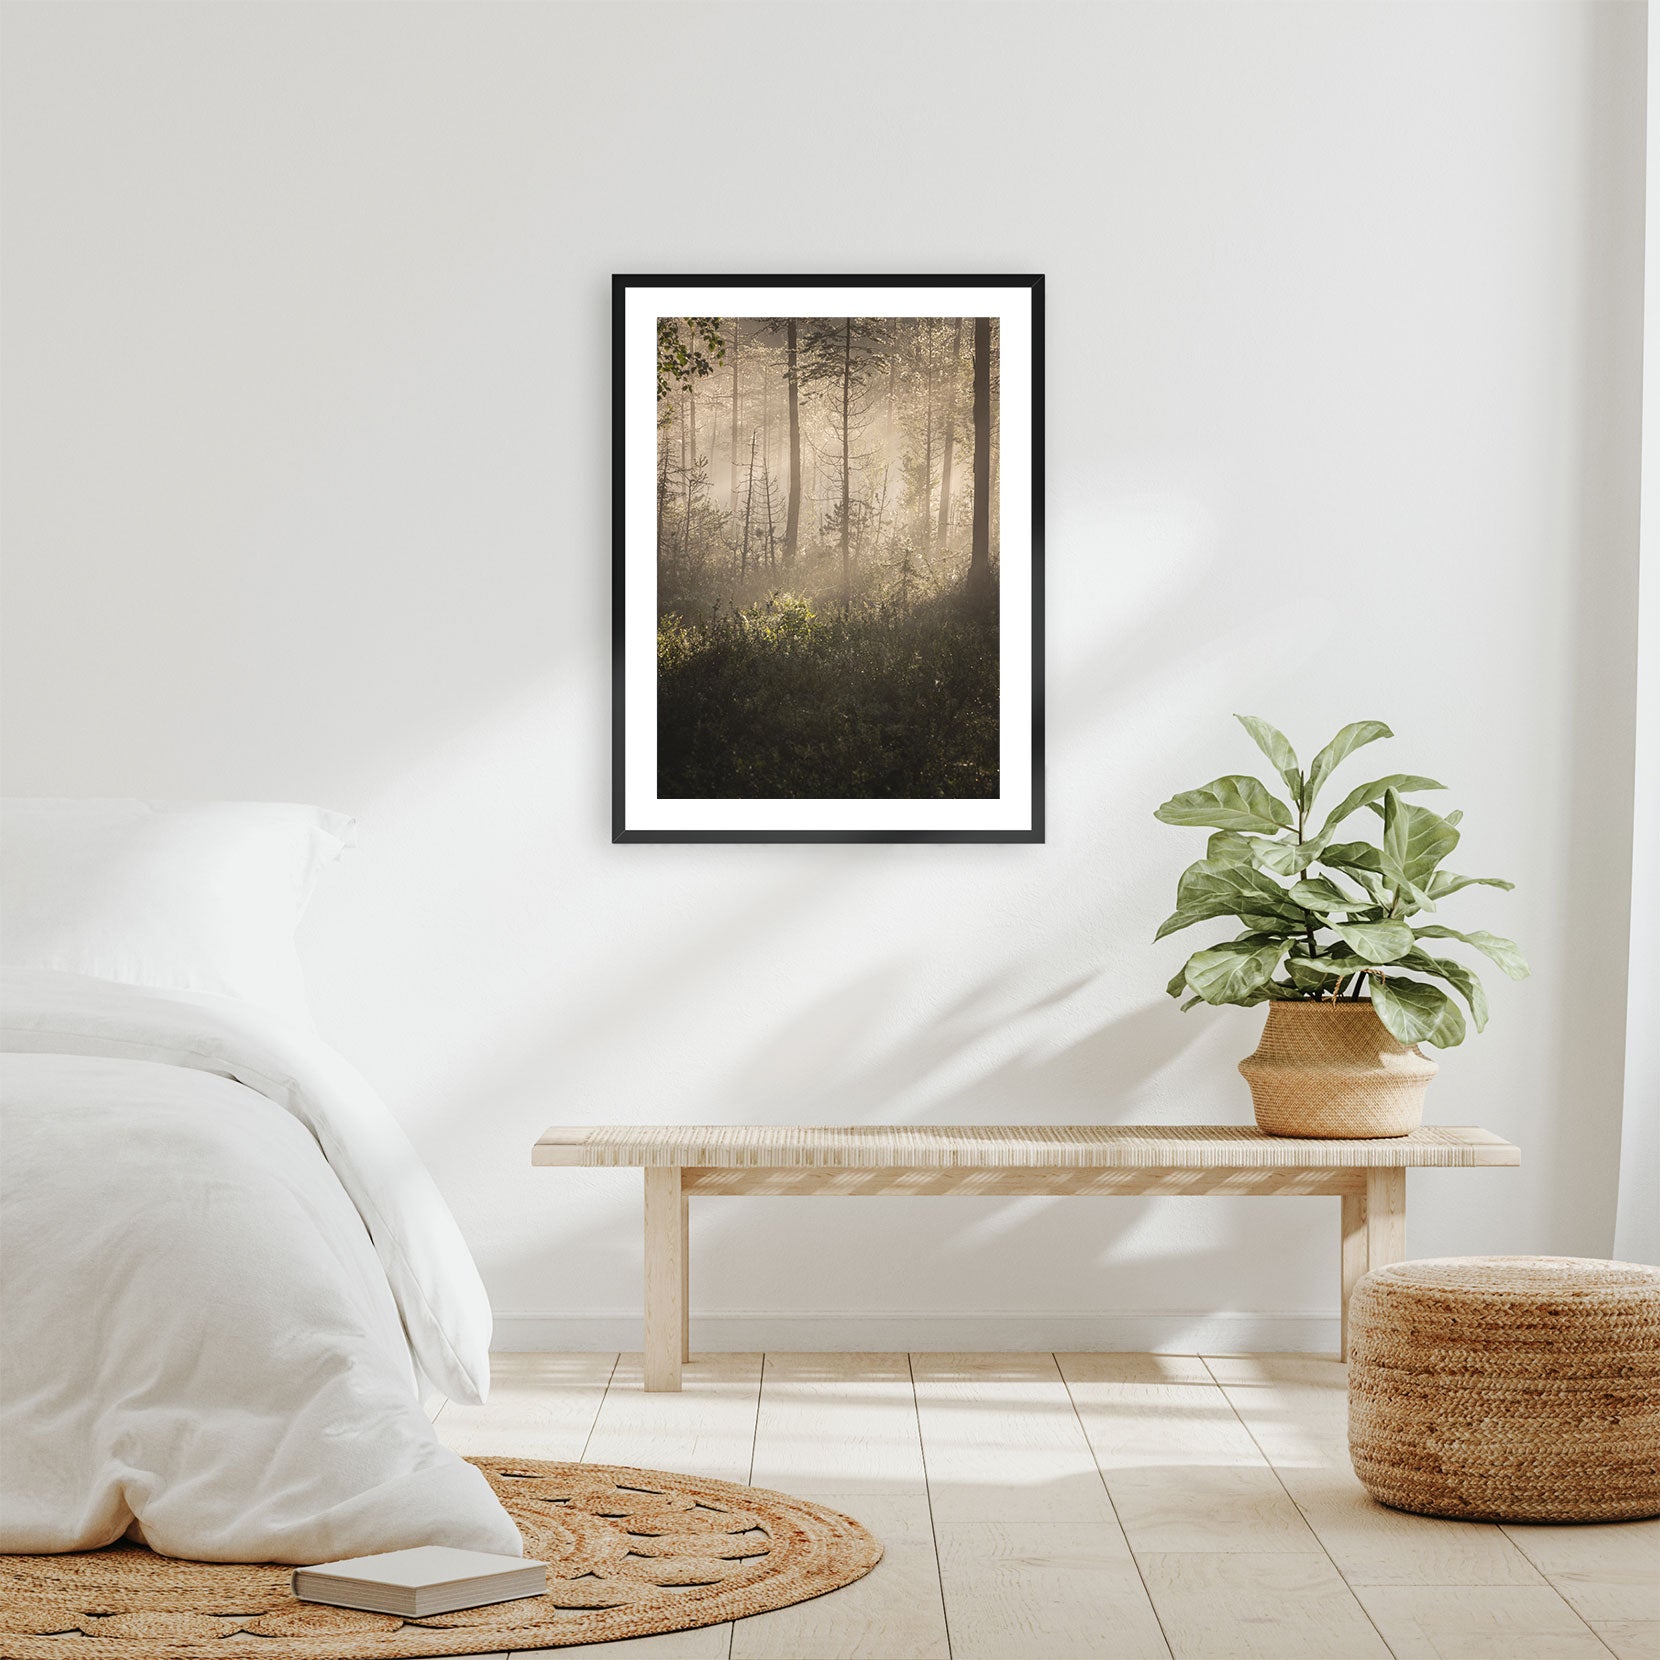 A framed print of a dawn in the forest